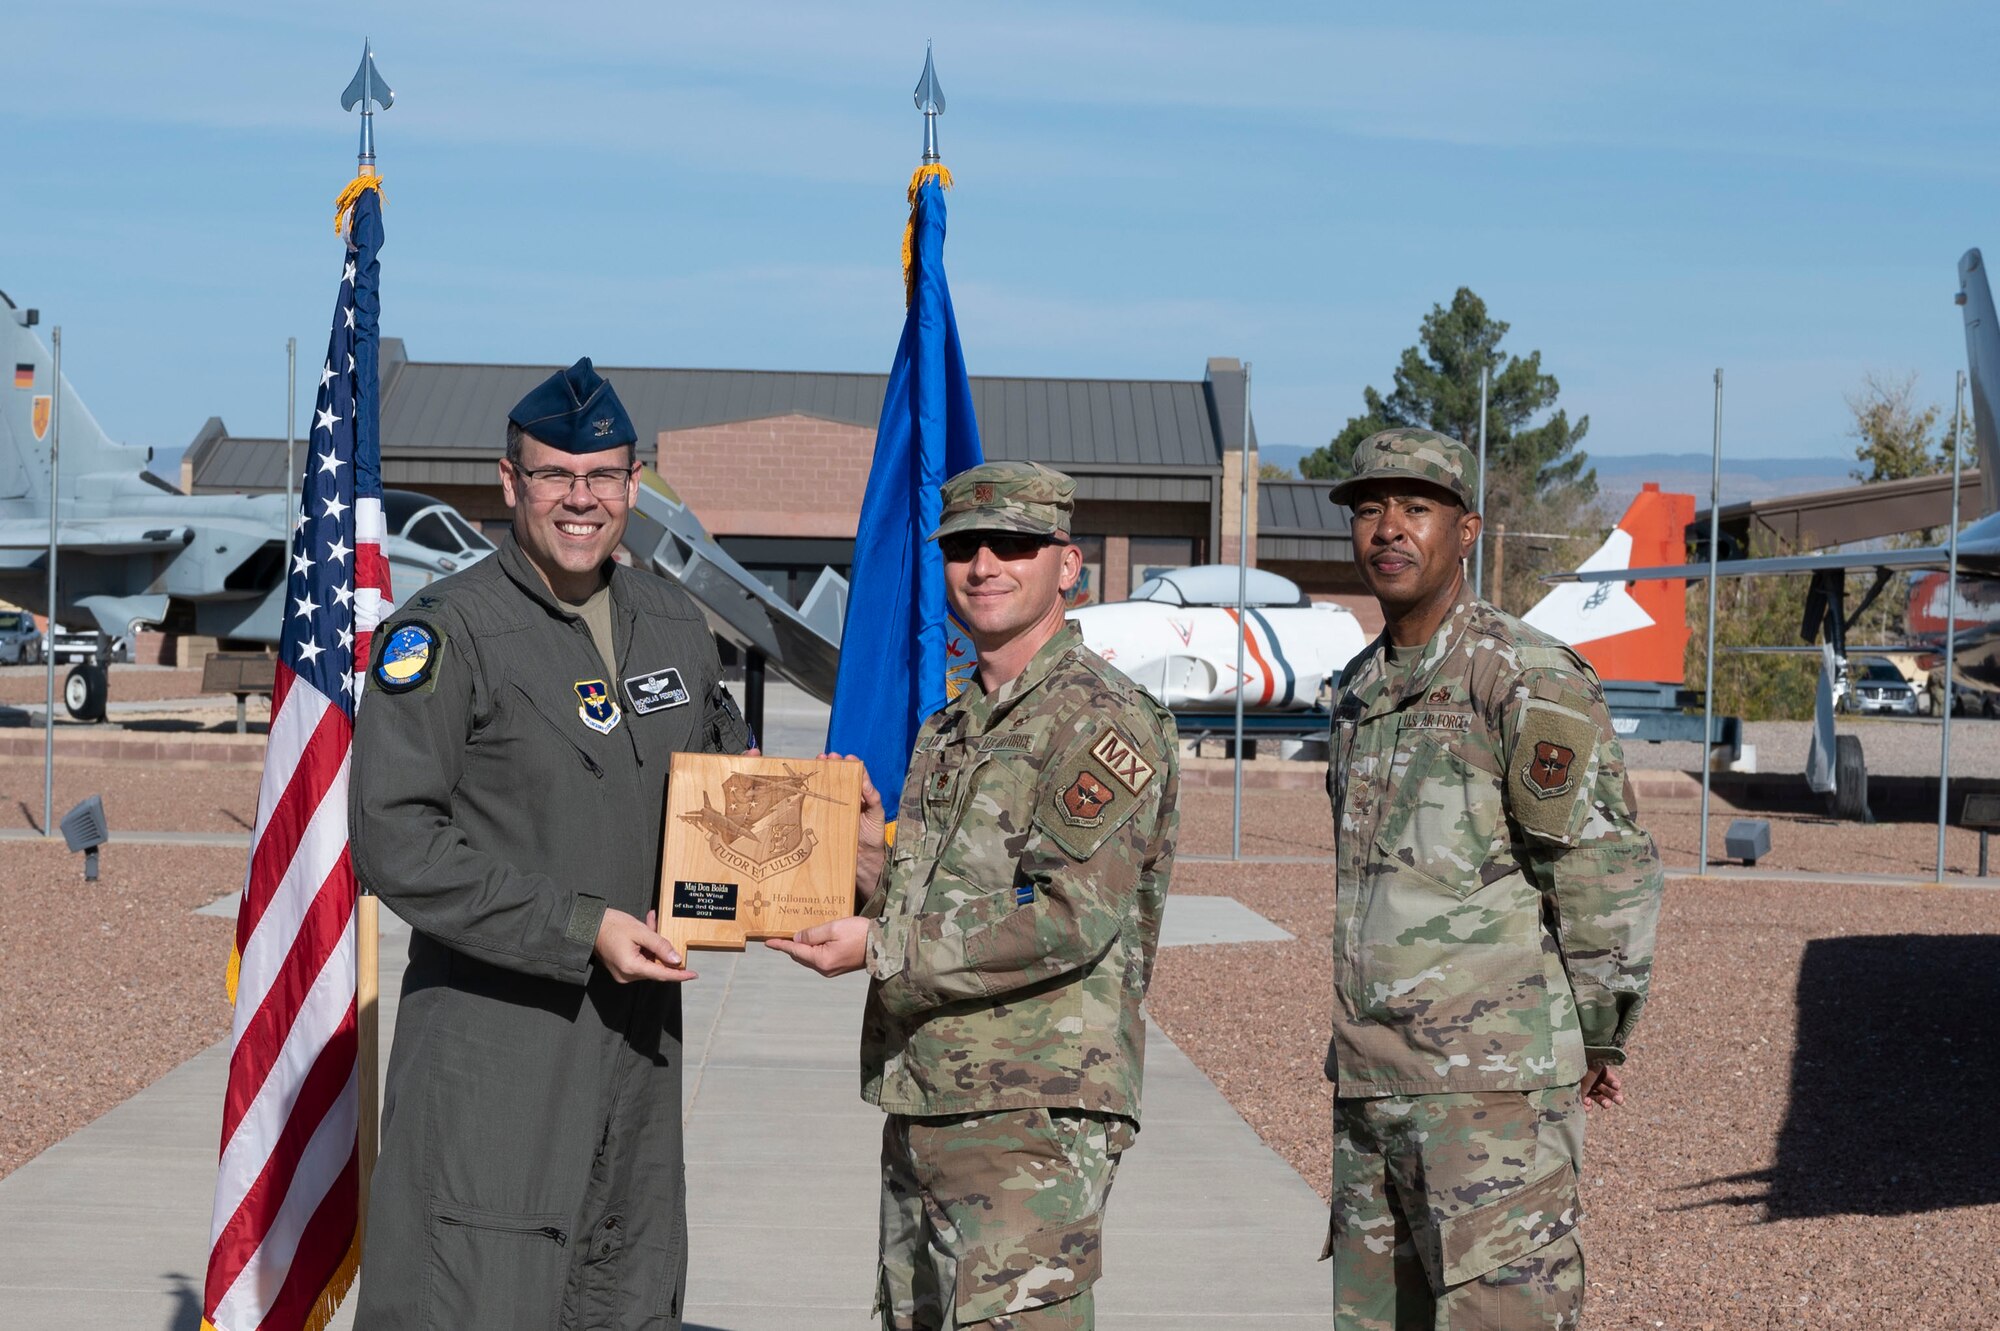 Maj. Donald Bolda, quarterly award winner, accepts the Field Grade Officer of the quarter award during the 49th Wing’s 3rd quarter award ceremony, Nov. 19, 2021, on Holloman Air Force Base, New Mexico. Quarterly award winners were selected based on their technical expertise, demonstration of leadership and job performance. (U.S. Air Force photo by Airman 1st Class Antonio Salfran)